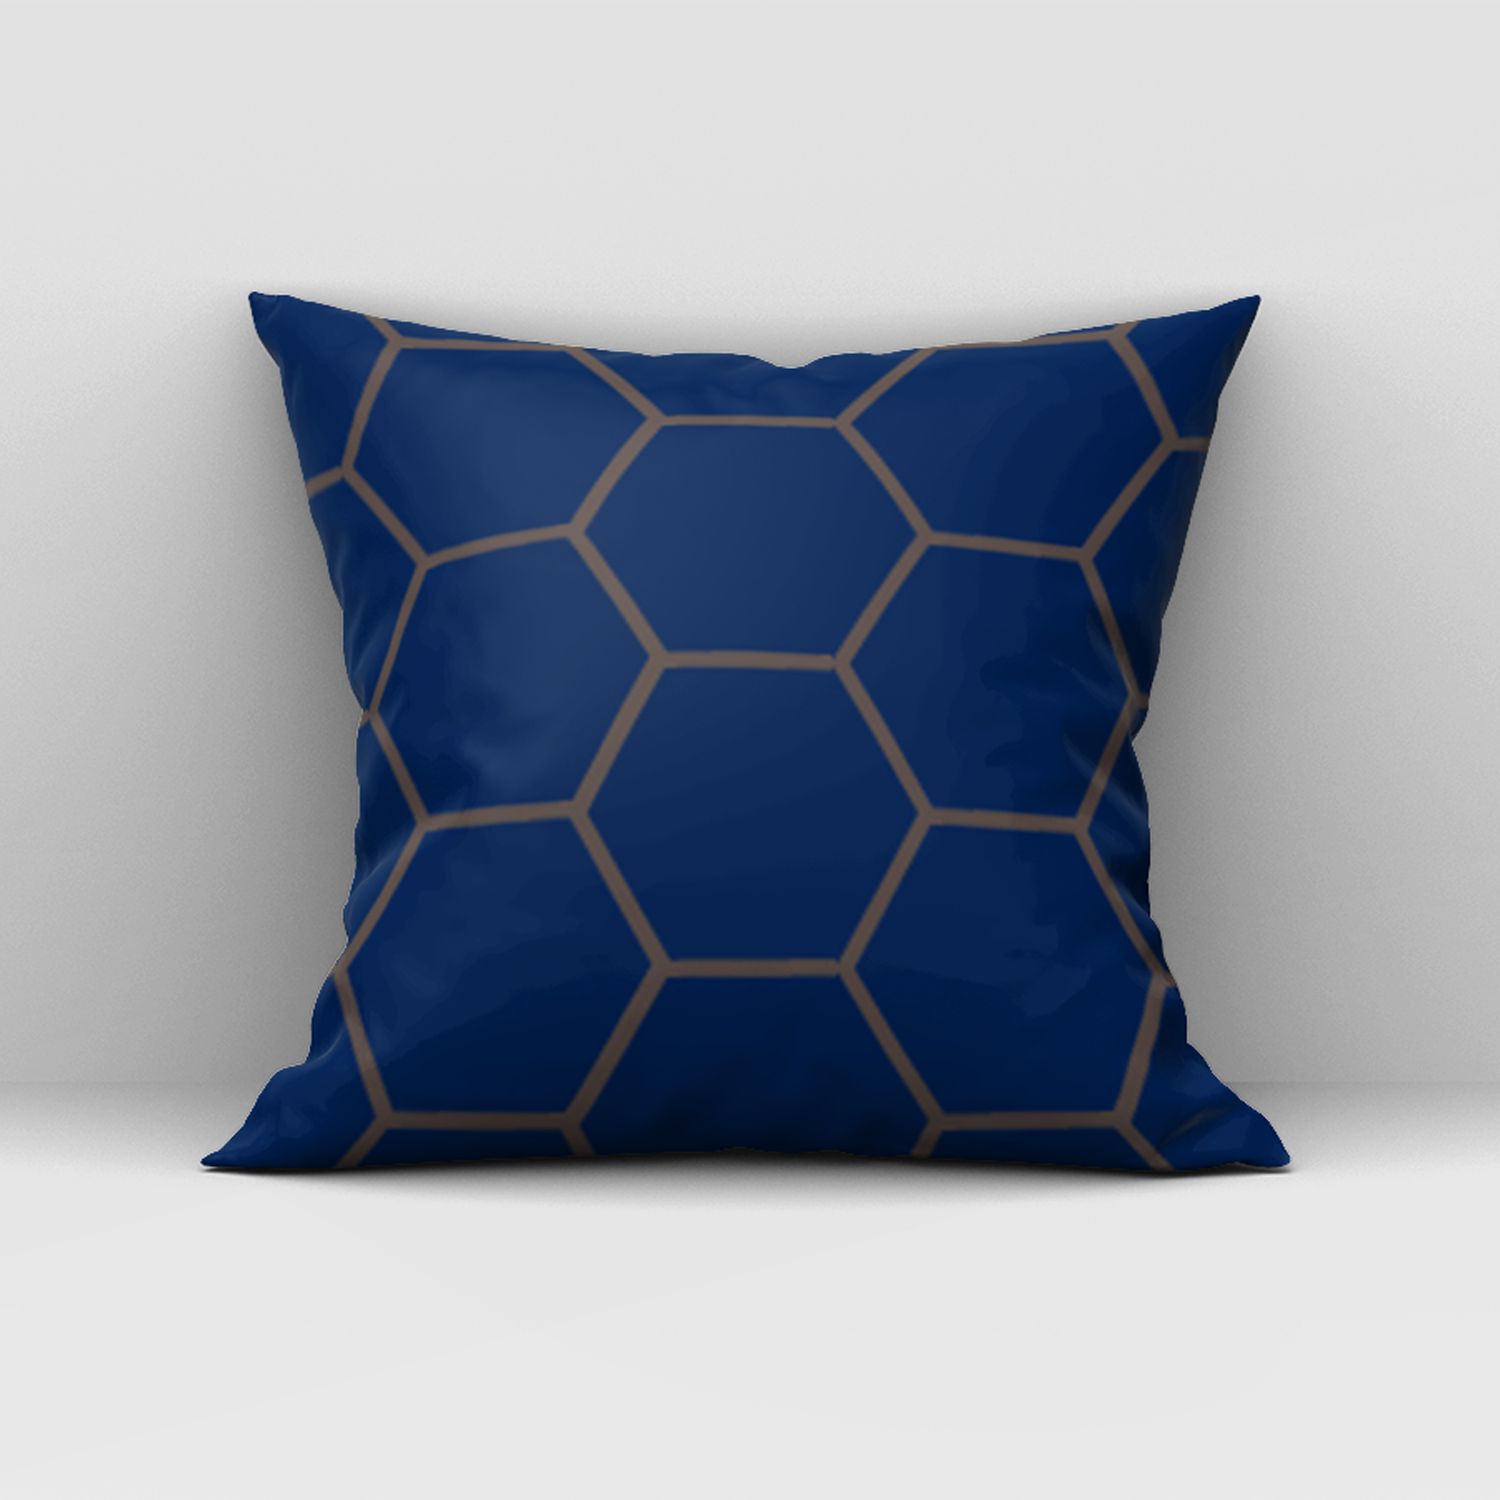 Brown over blue Honeycomb